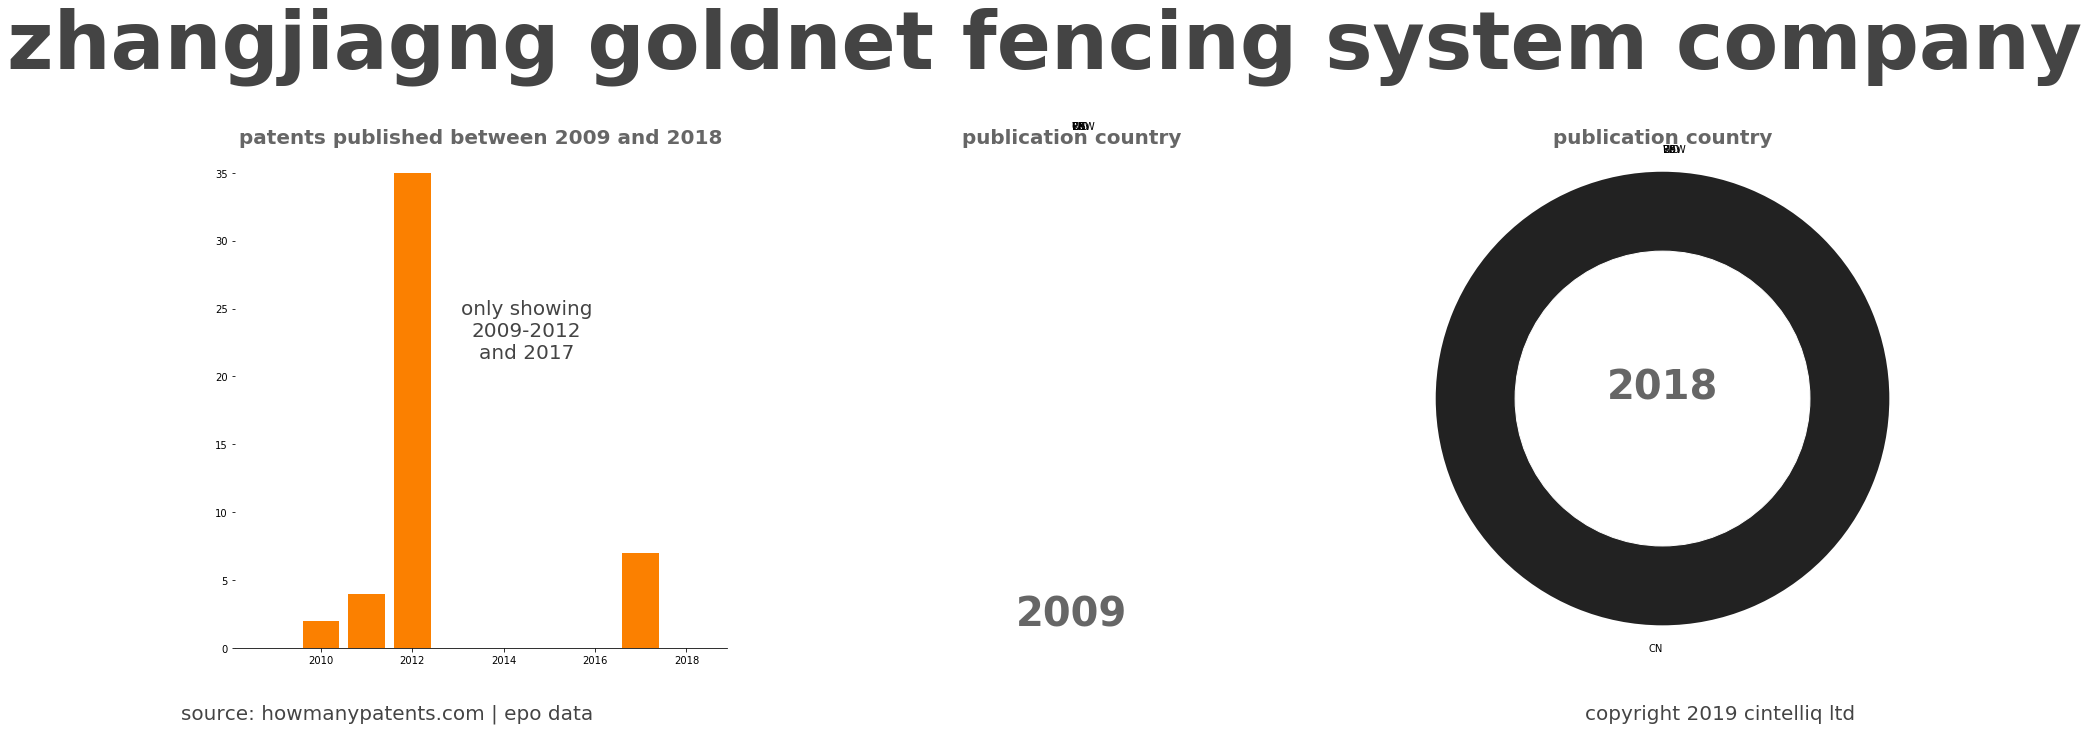 summary of patents for Zhangjiagng Goldnet Fencing System Company